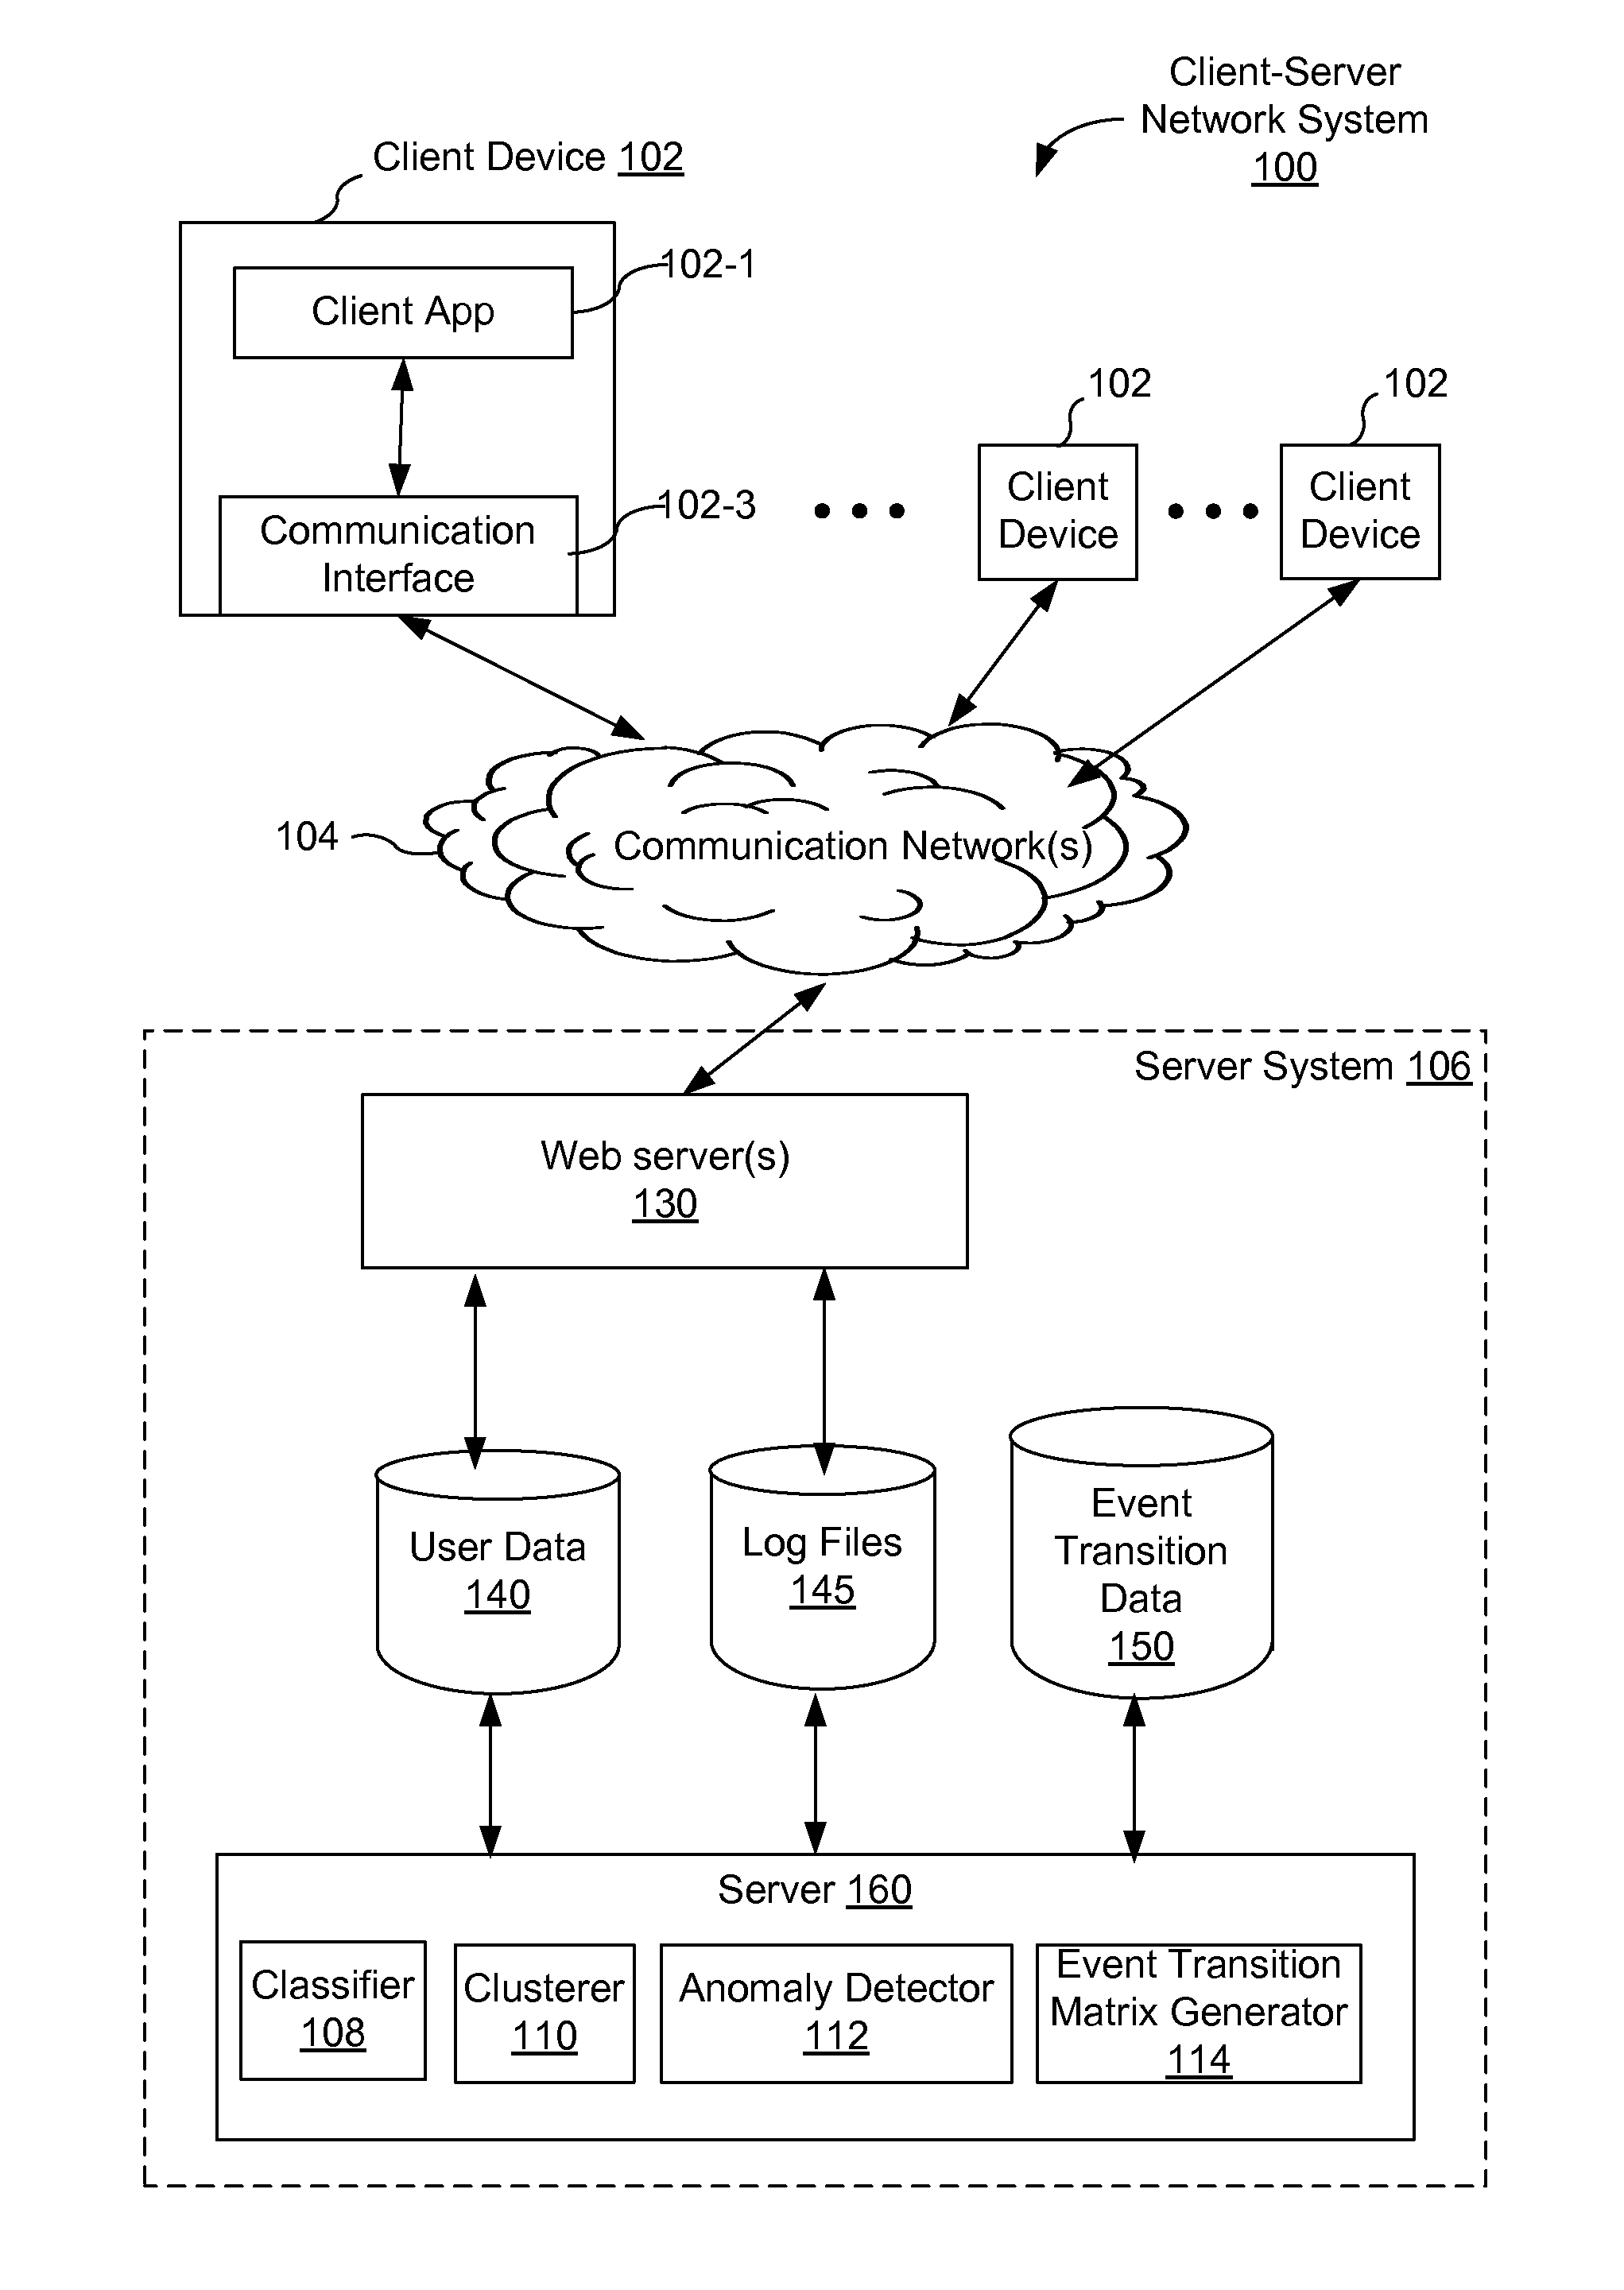 Method and system for website user account management based on event transition matrixes